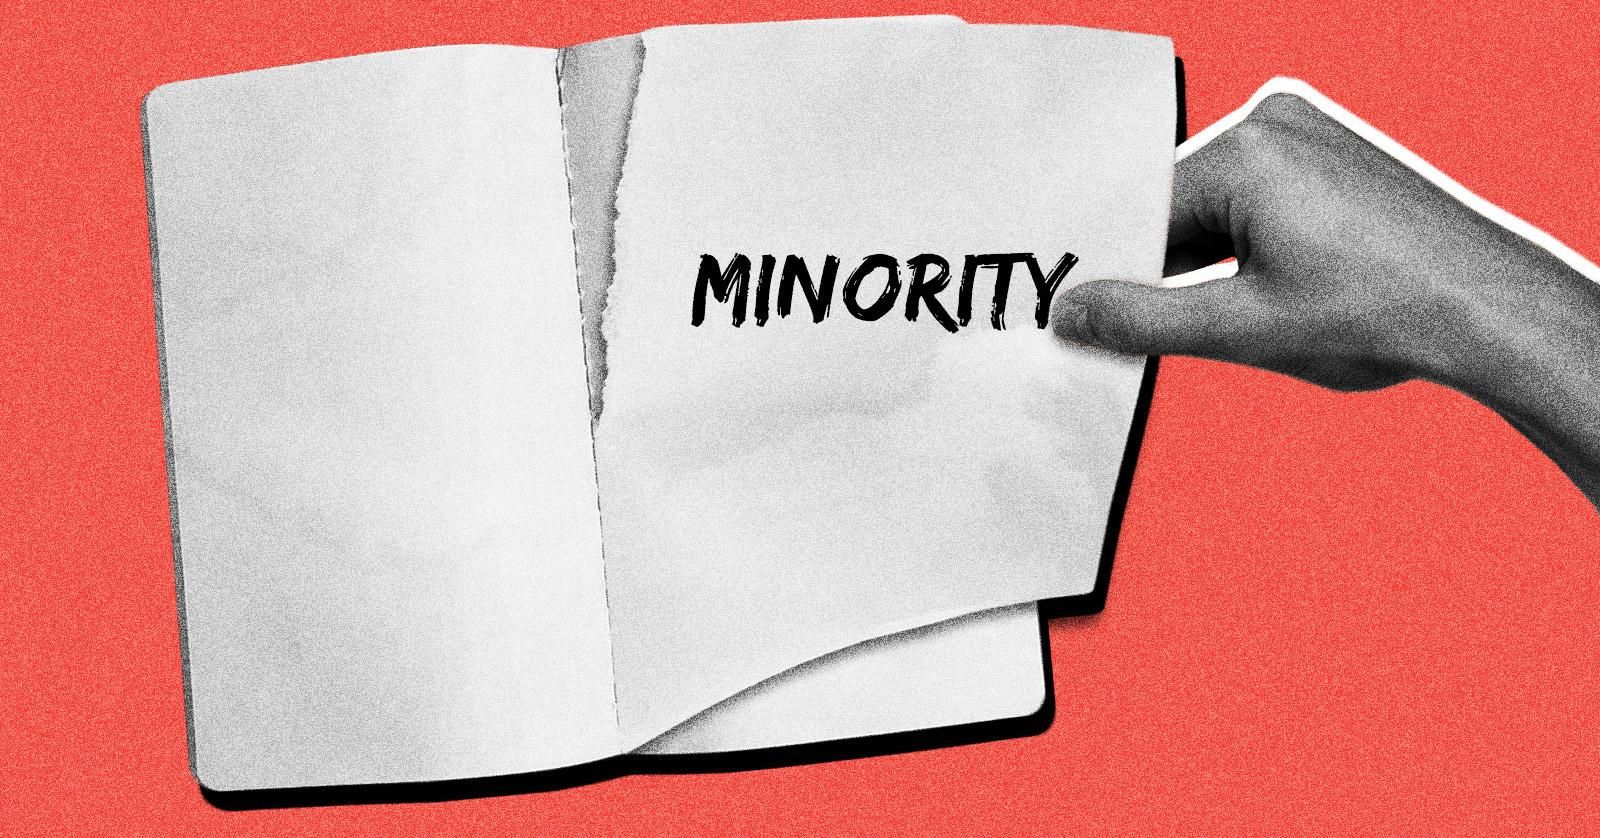 "If you believe words have power–or can disempower–the “minority” labeling of Black and brown people has surely played no small part in our concerns being ignored or perpetually diluted by white politicians, businesses, and voters," writes Jackson. (Image: Grist / Viktoriya Kuzmenkova / nndanko / Getty Images)